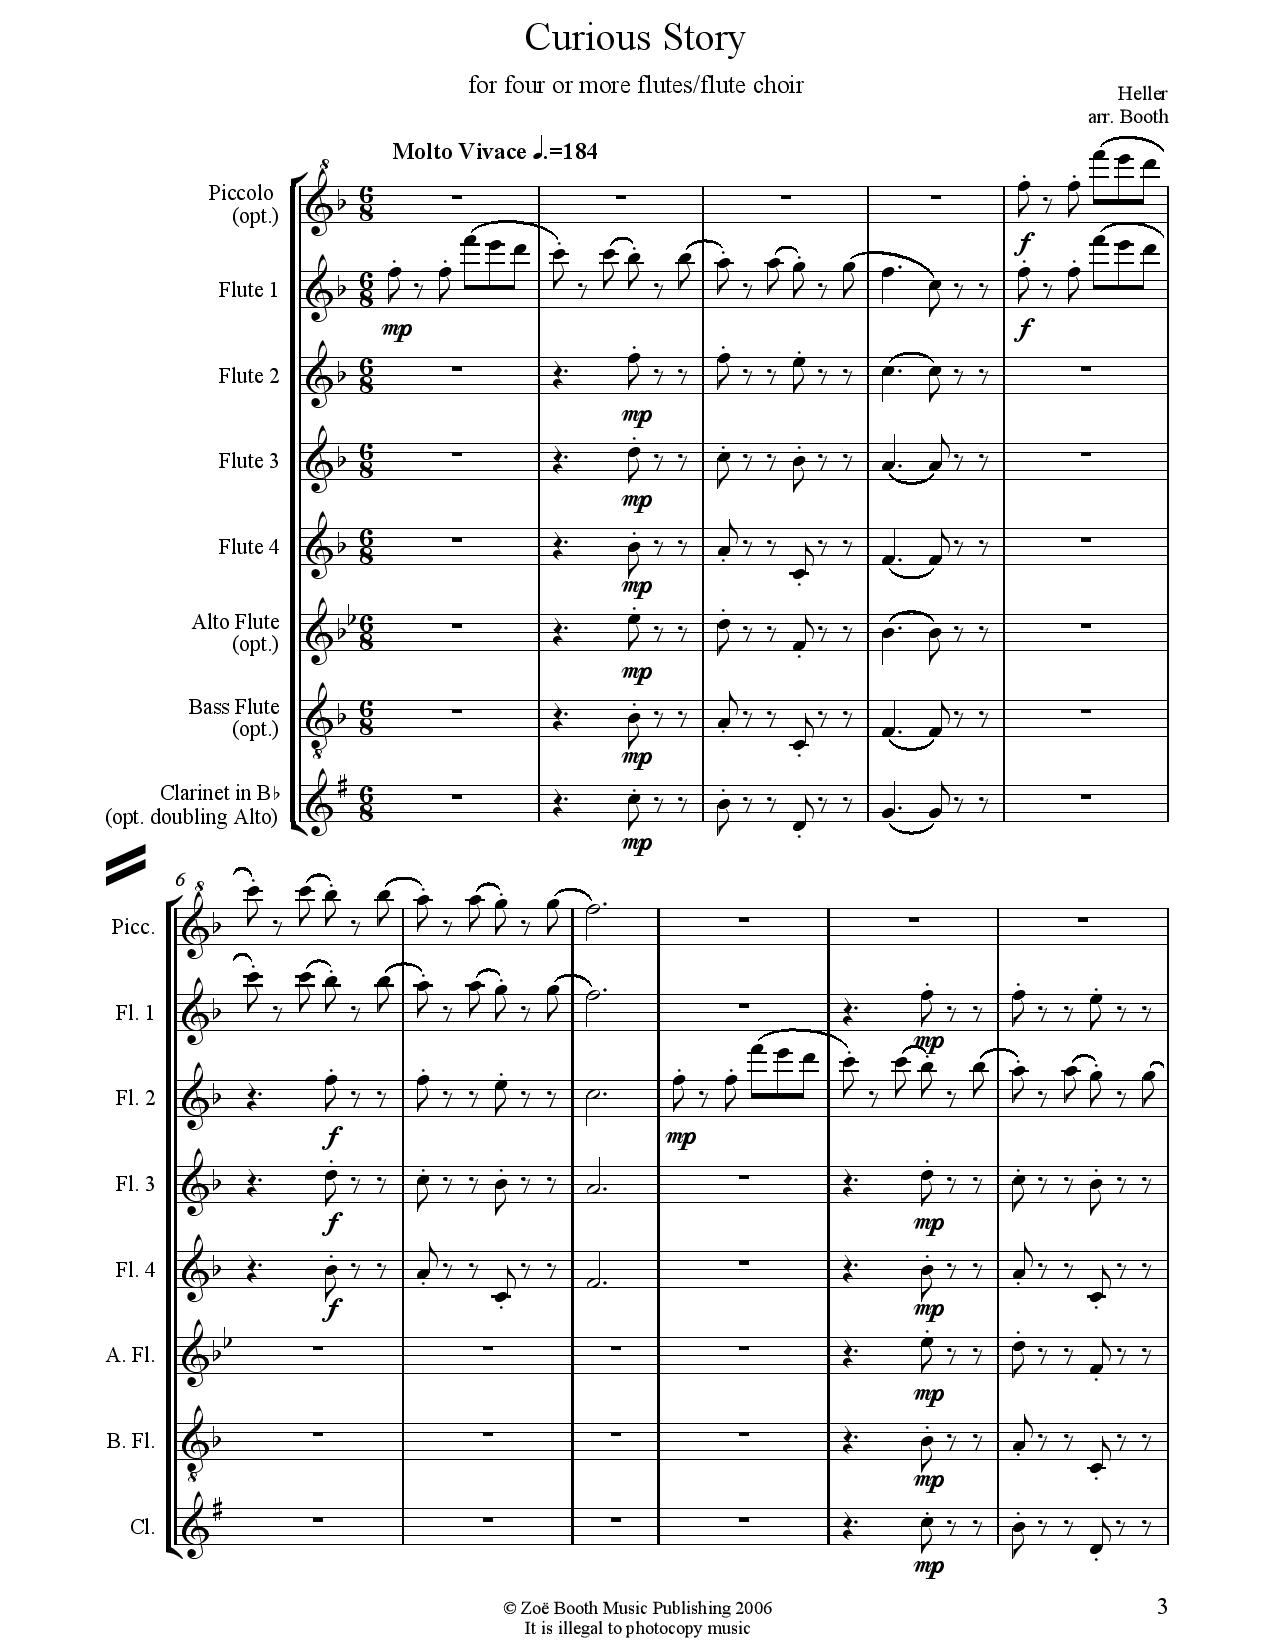 Curious Story by Heller,  arranged by Zoë Booth for four or more flutes/flute choir